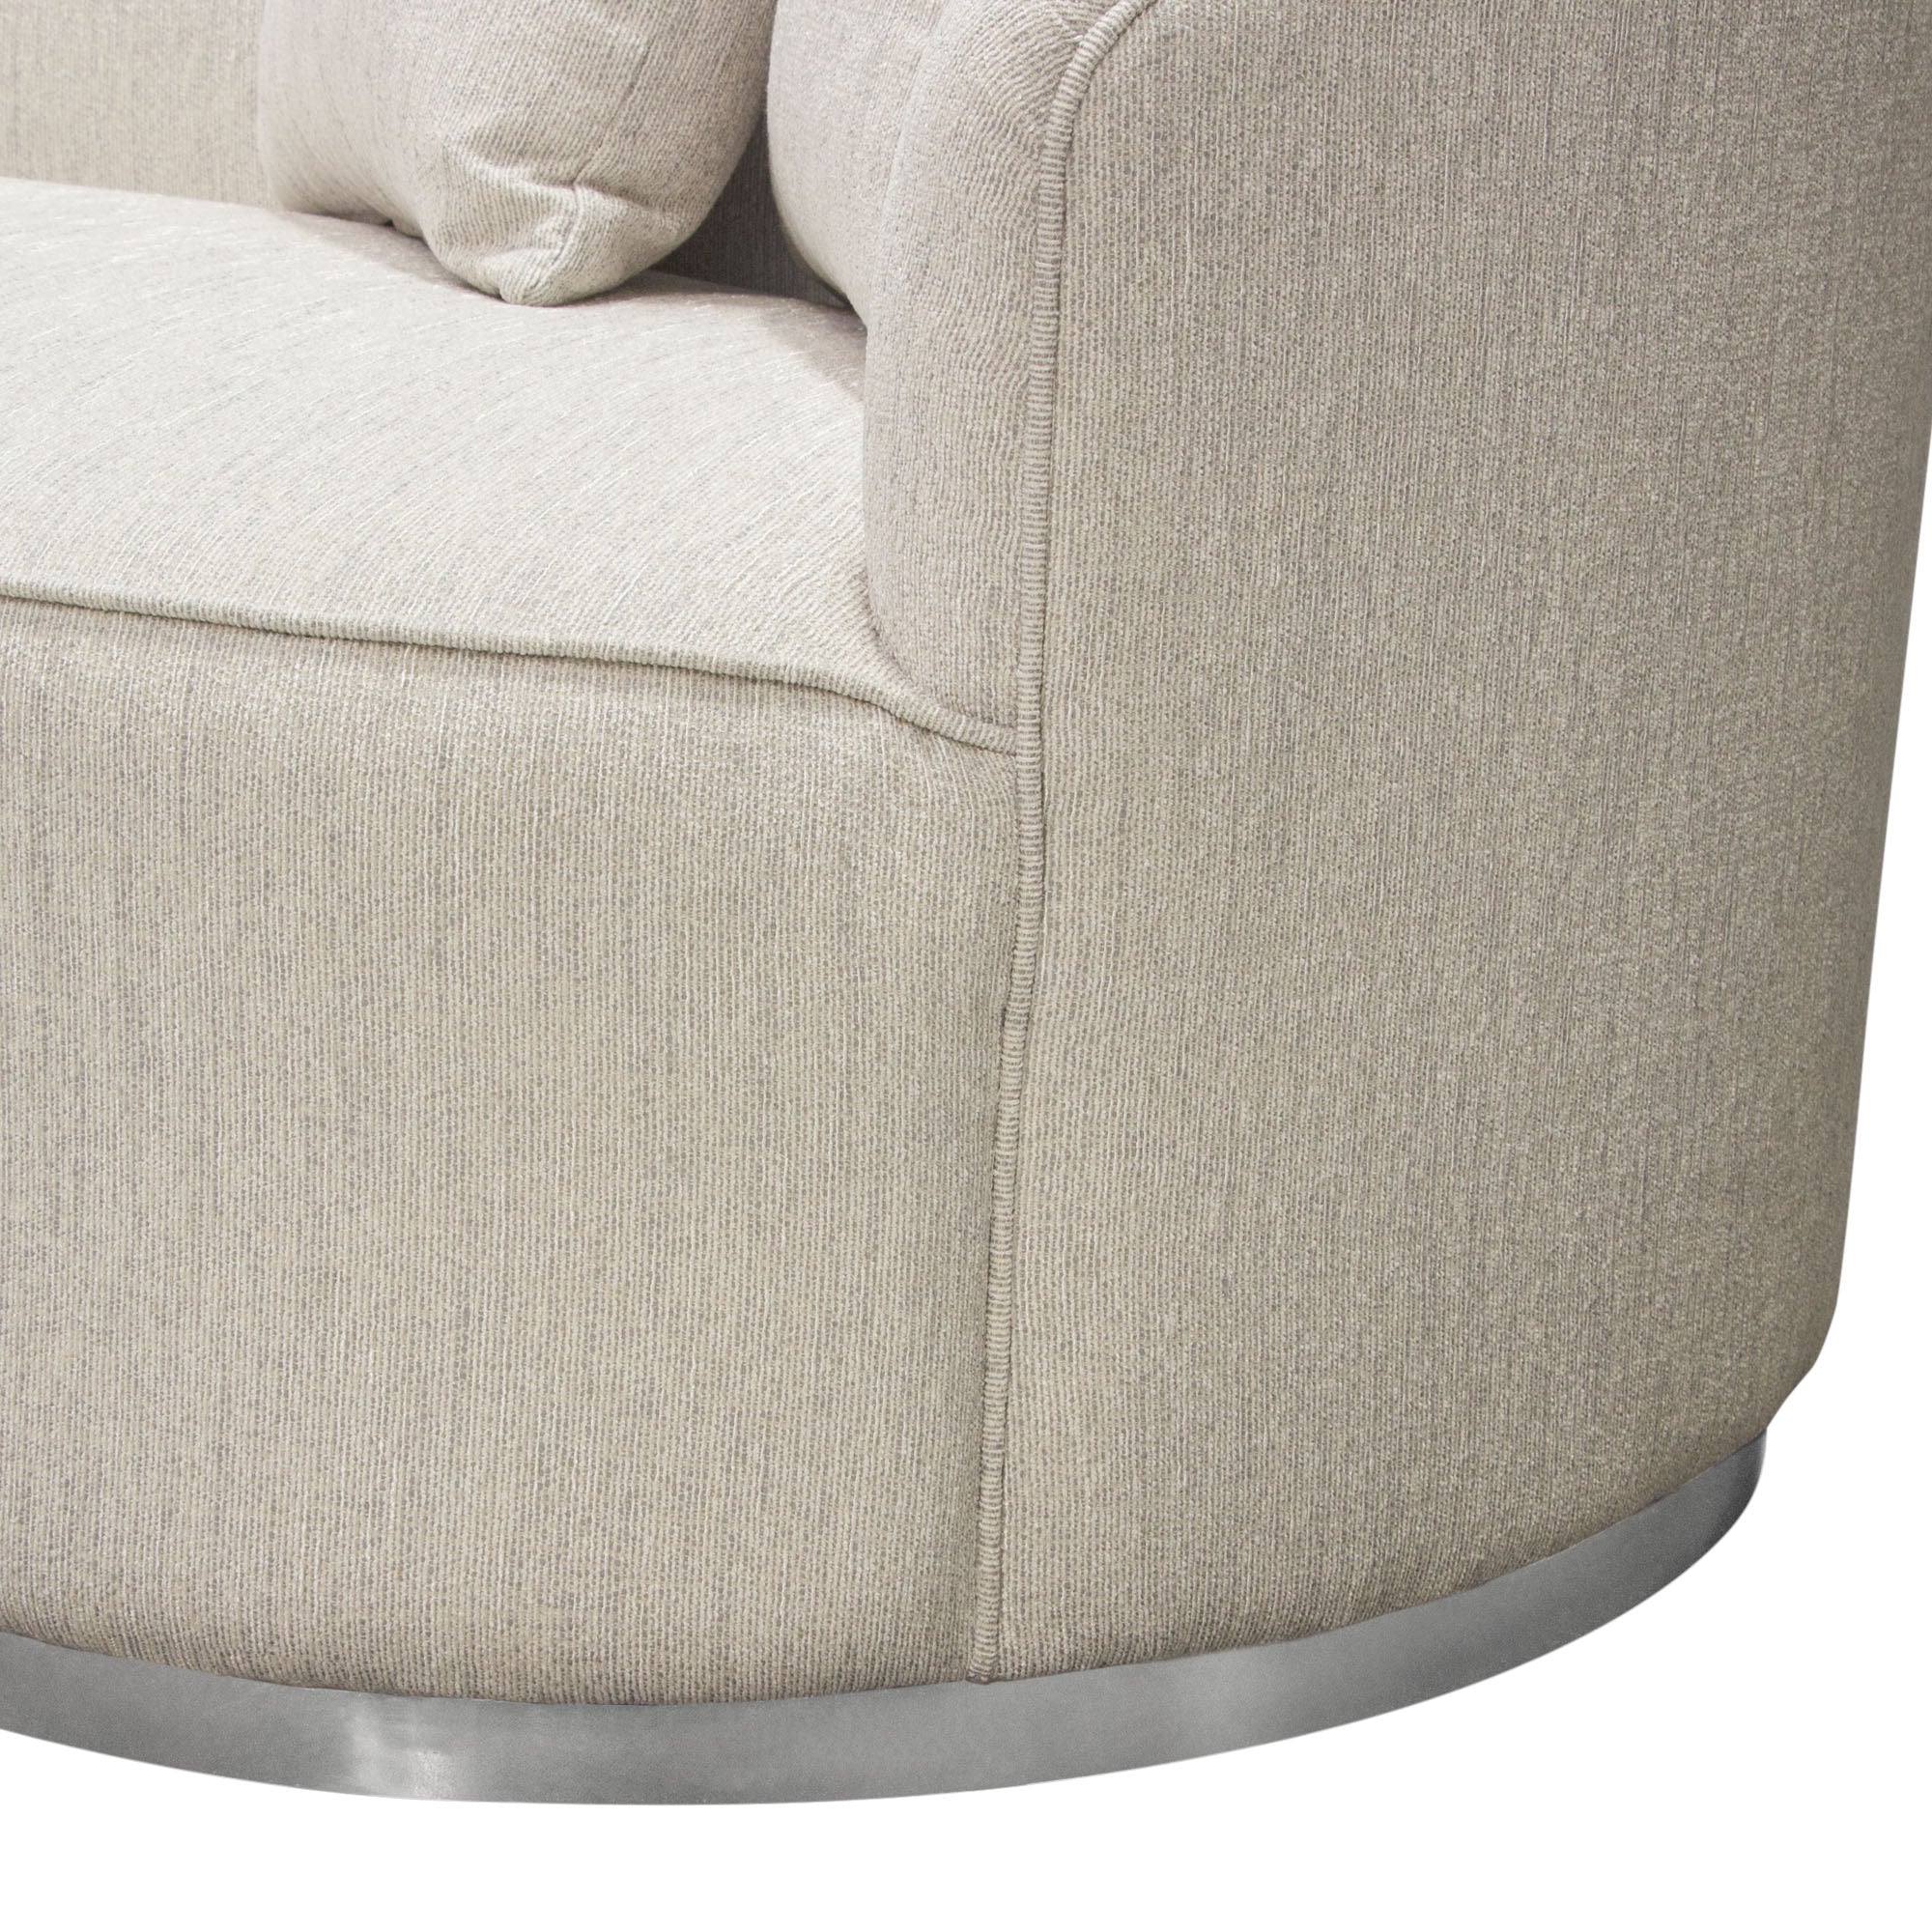 Diamond Sofa Raven Sofa in Light Cream Fabric with Brushed Silver Accent